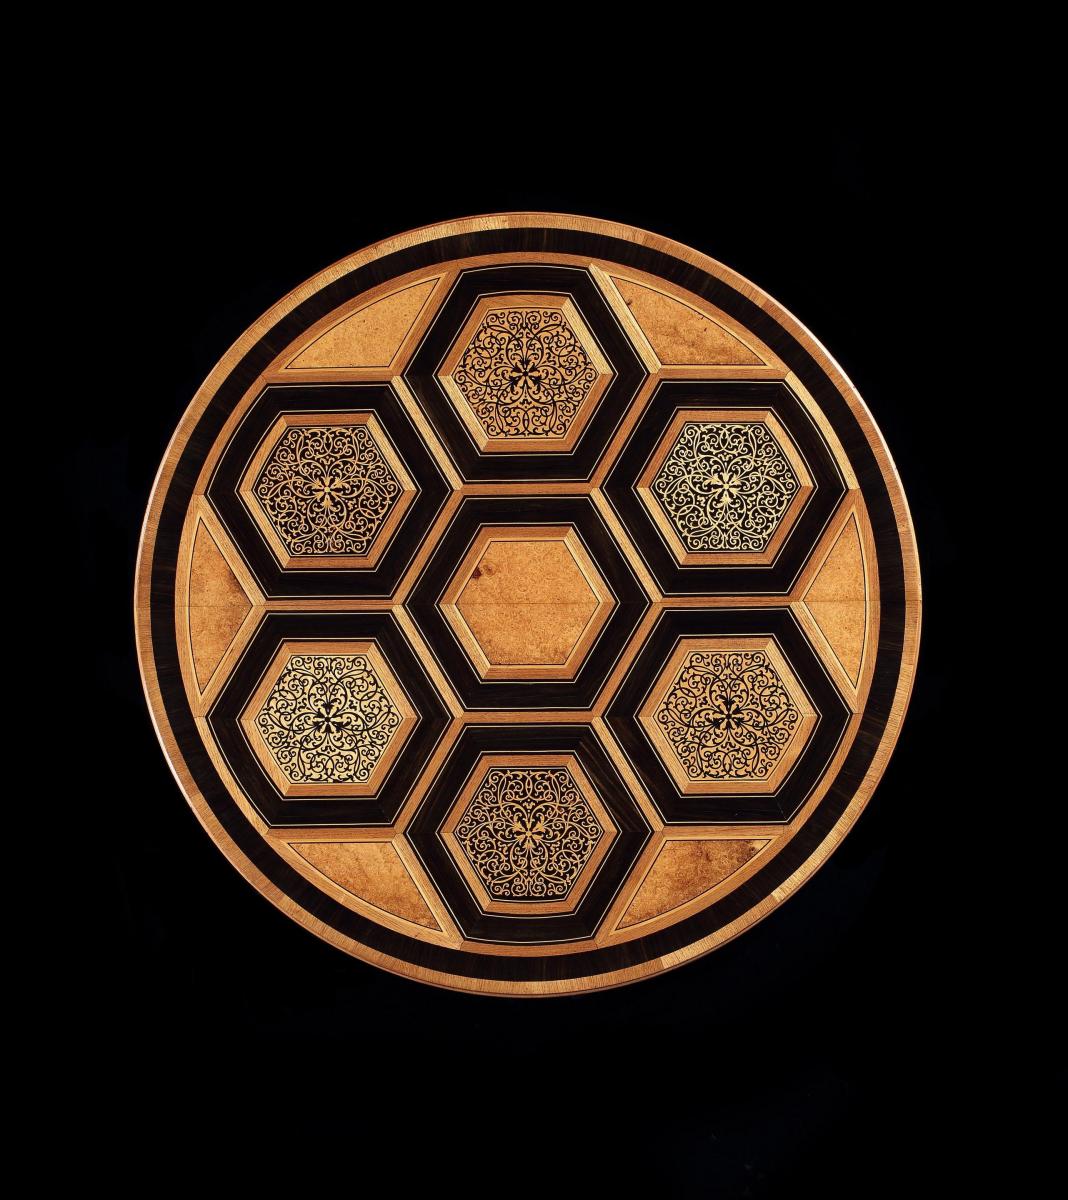 A late 19th century Baltic marquetry centre table